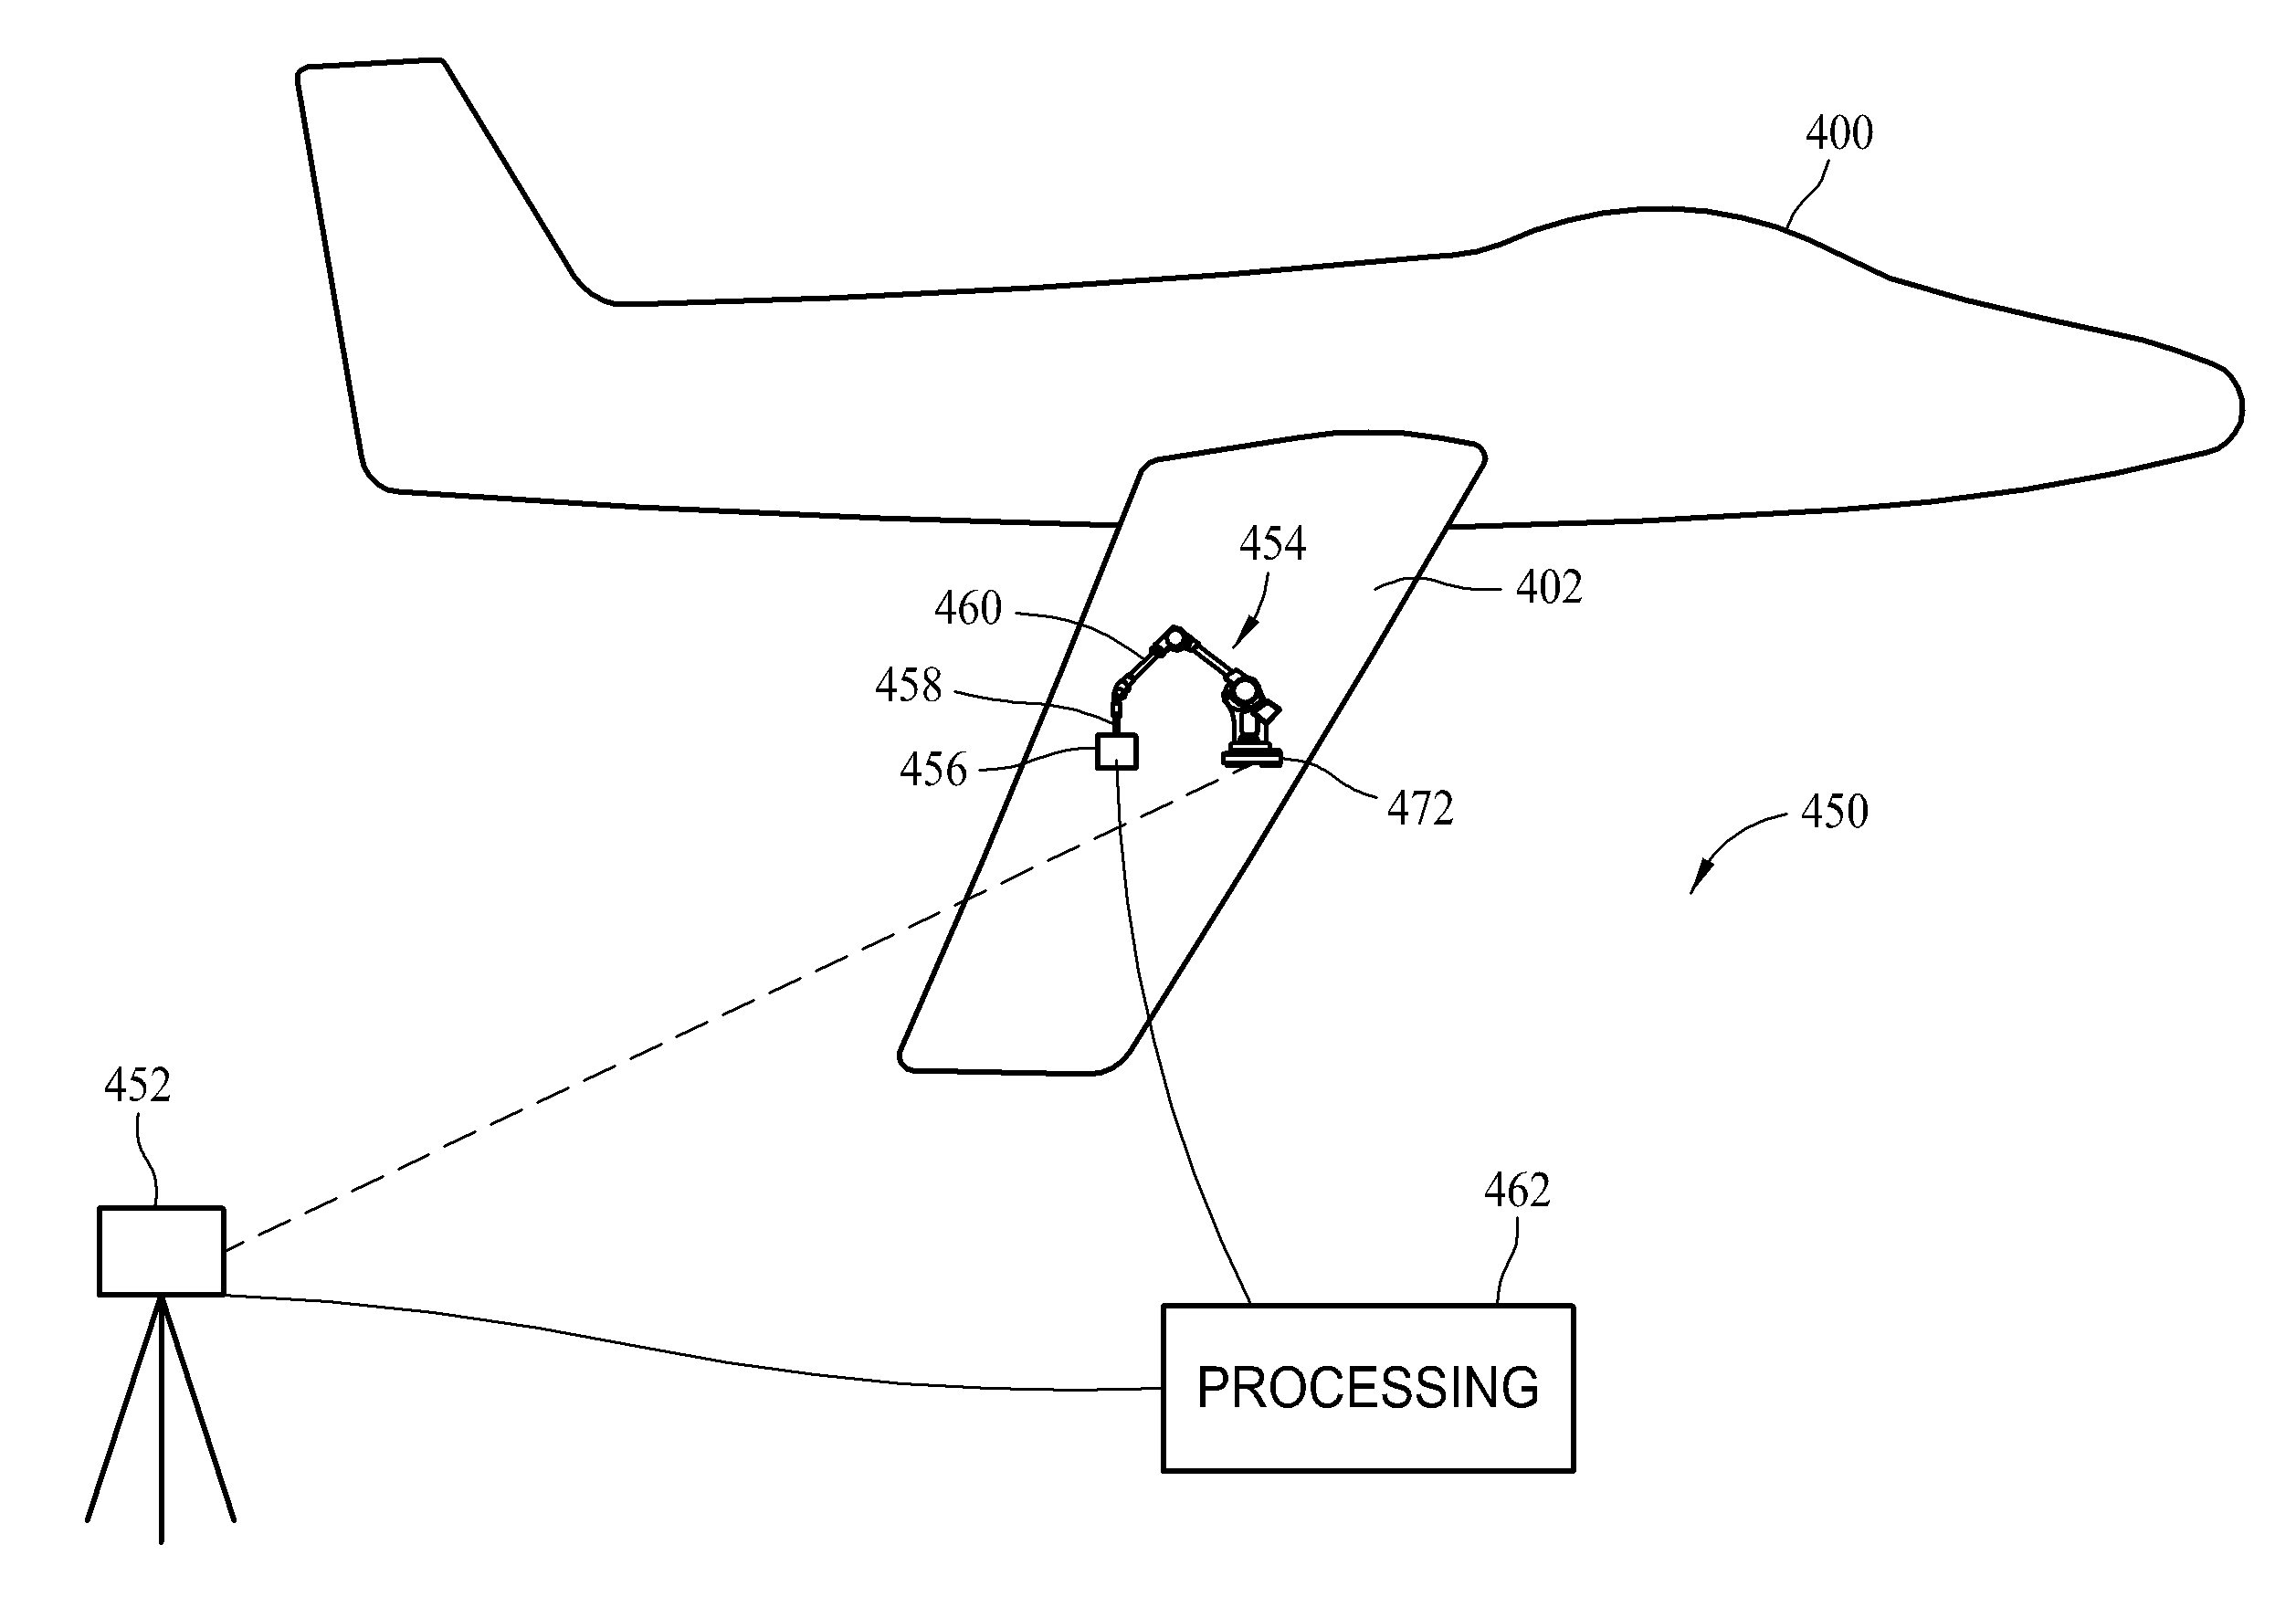 Methods and systems for non-destructive composite evaluation and repair verification